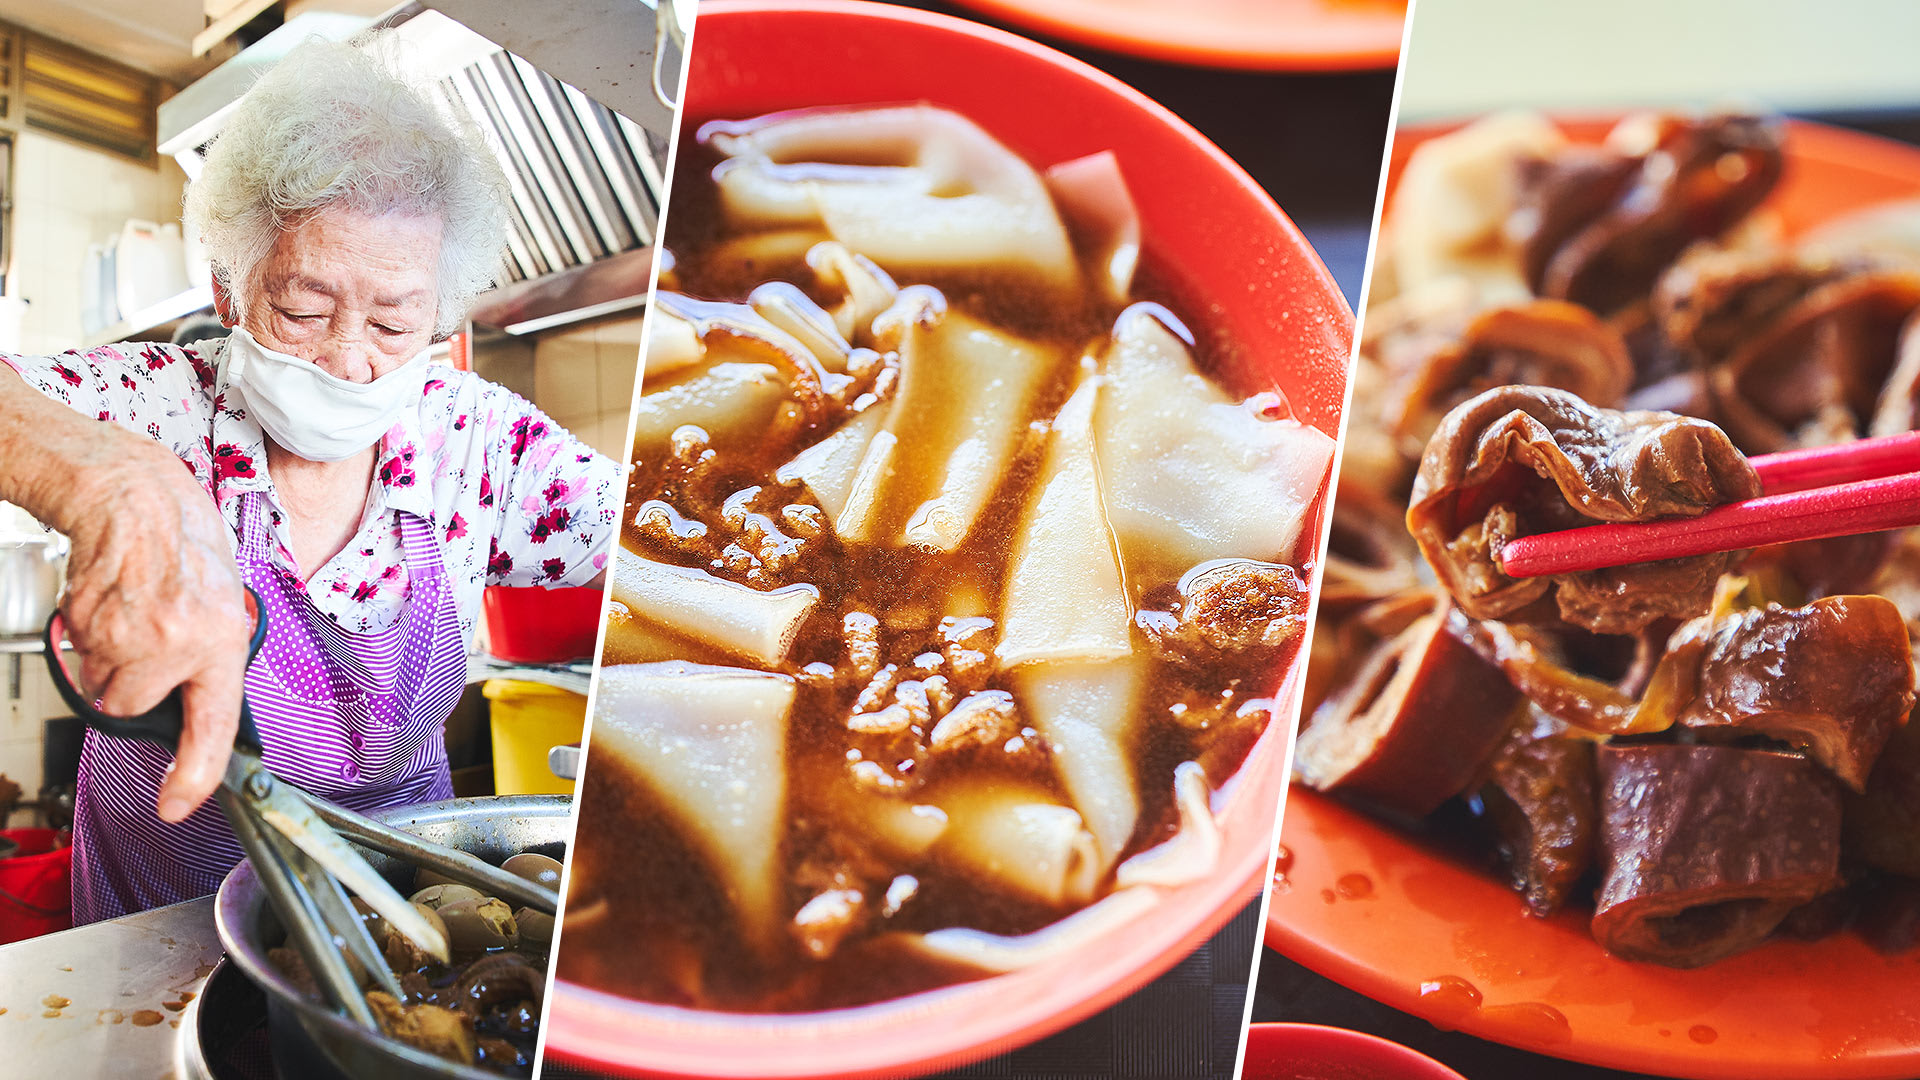 Kway Chap From $3, Served By 89-Year-Old Hawker Who Opens Stall At 6am